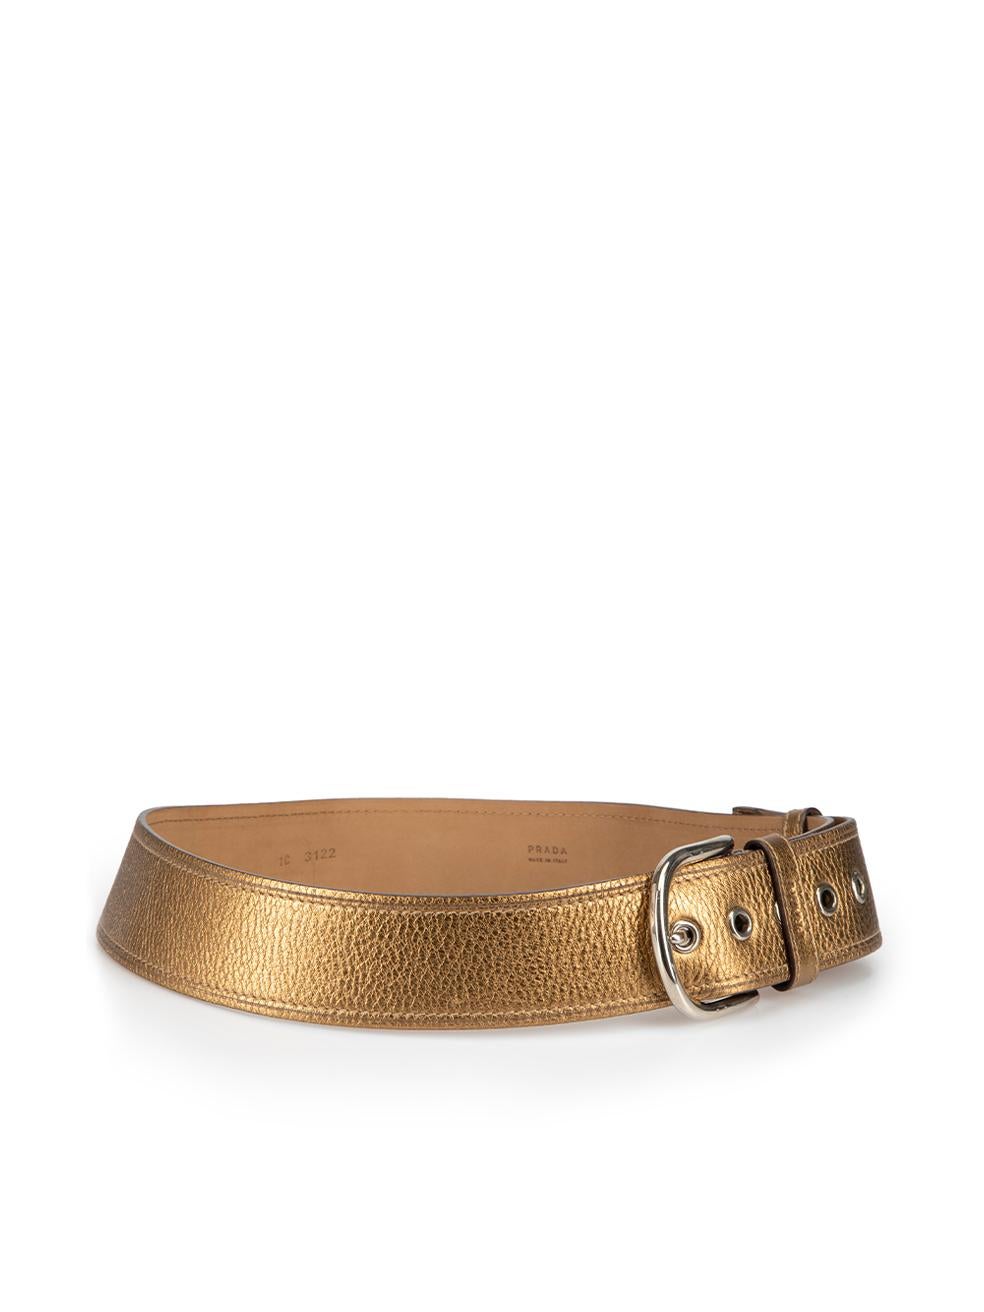 CONDITION is Very good. Hardly any visible wear to belt is evident on this used Prada designer resale item.



Details


Metallic gold

Leather

Wide belt

Silver tone hardware



 

Made in Italy 

 

Composition

EXTERIOR: Leather

 

Size &